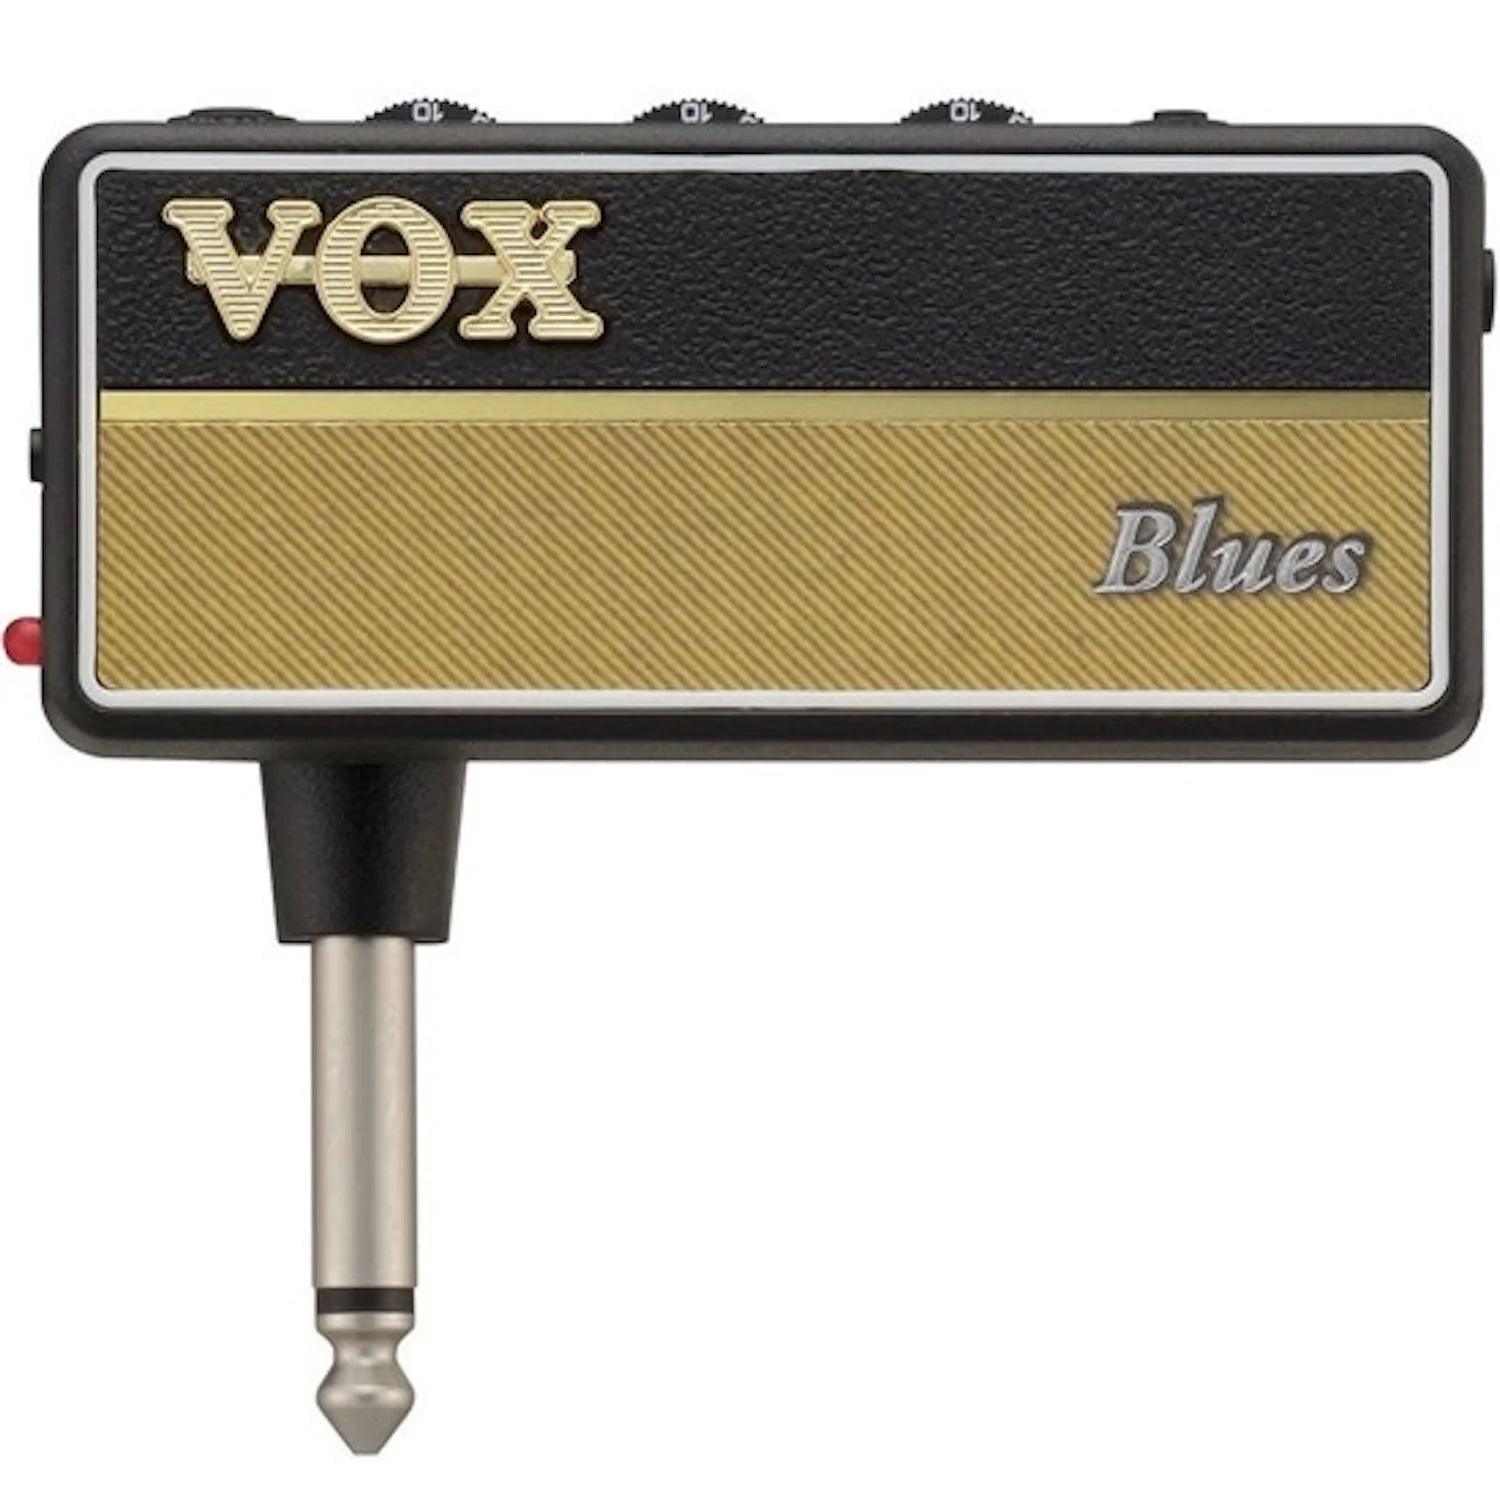 VOX AP2-BL Amplug 2 Blues - Guitars - Amplifiers by VOX at Muso's Stuff